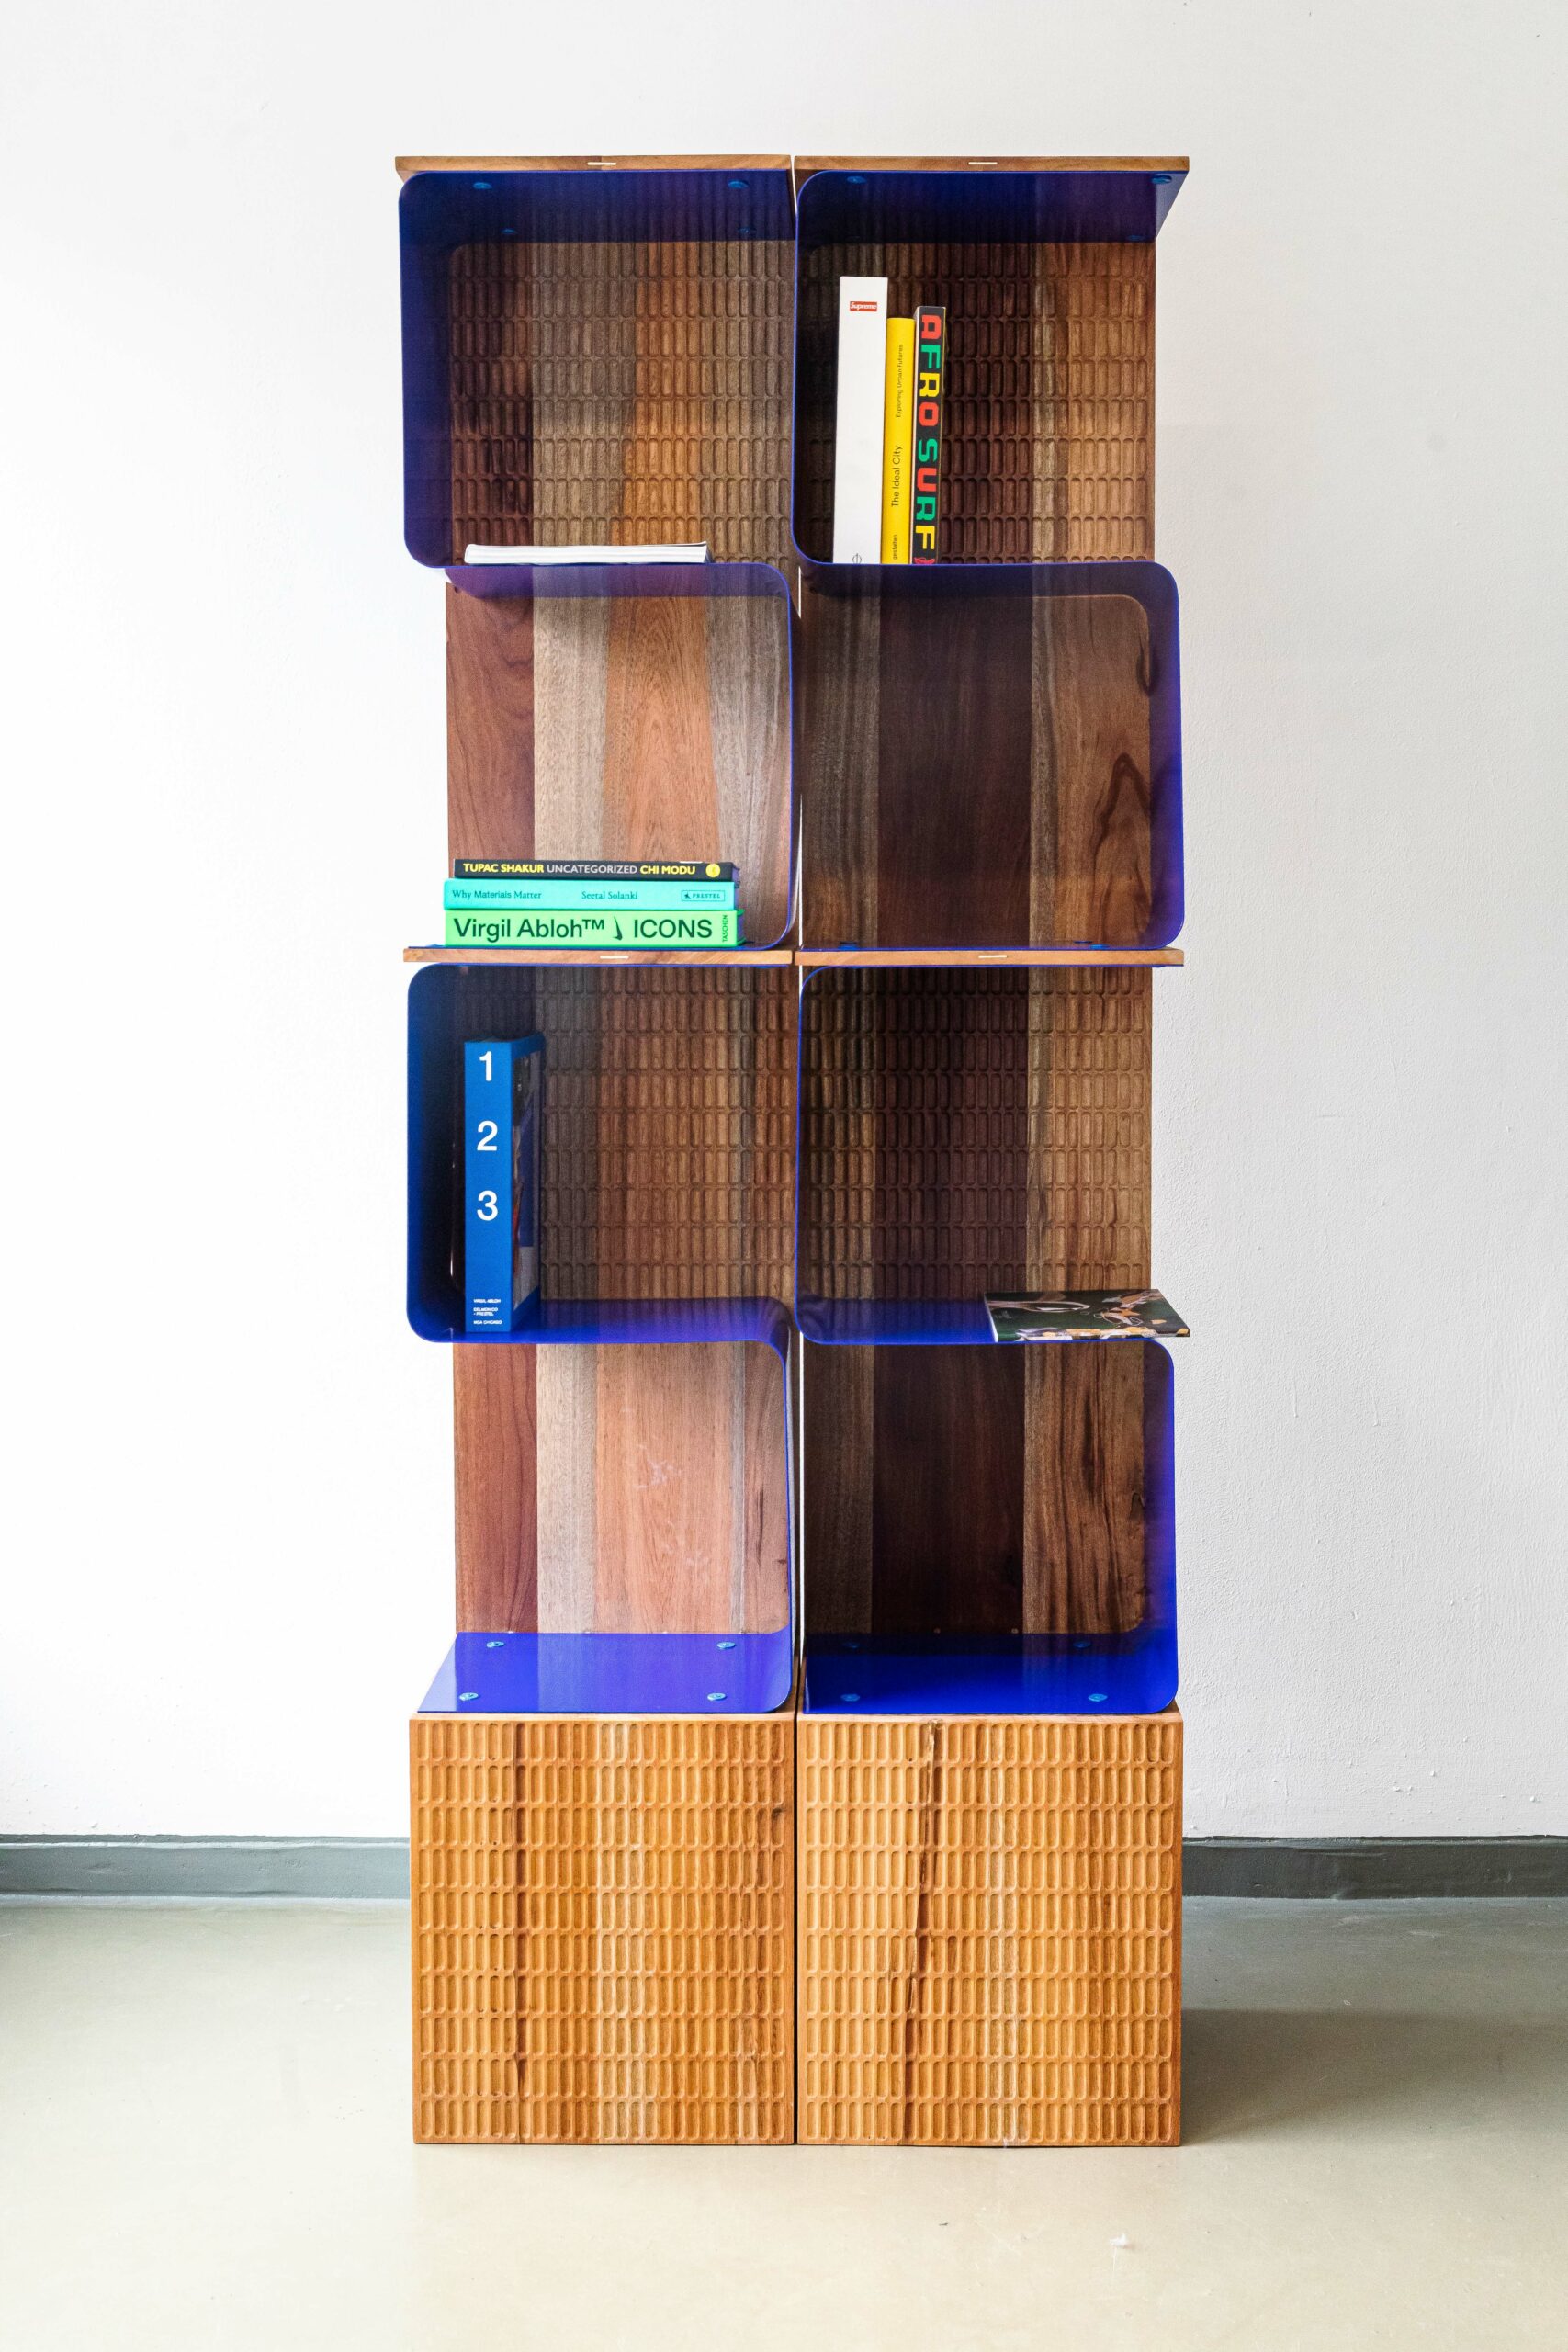 A book shelf made of wood and bent blue plastic.